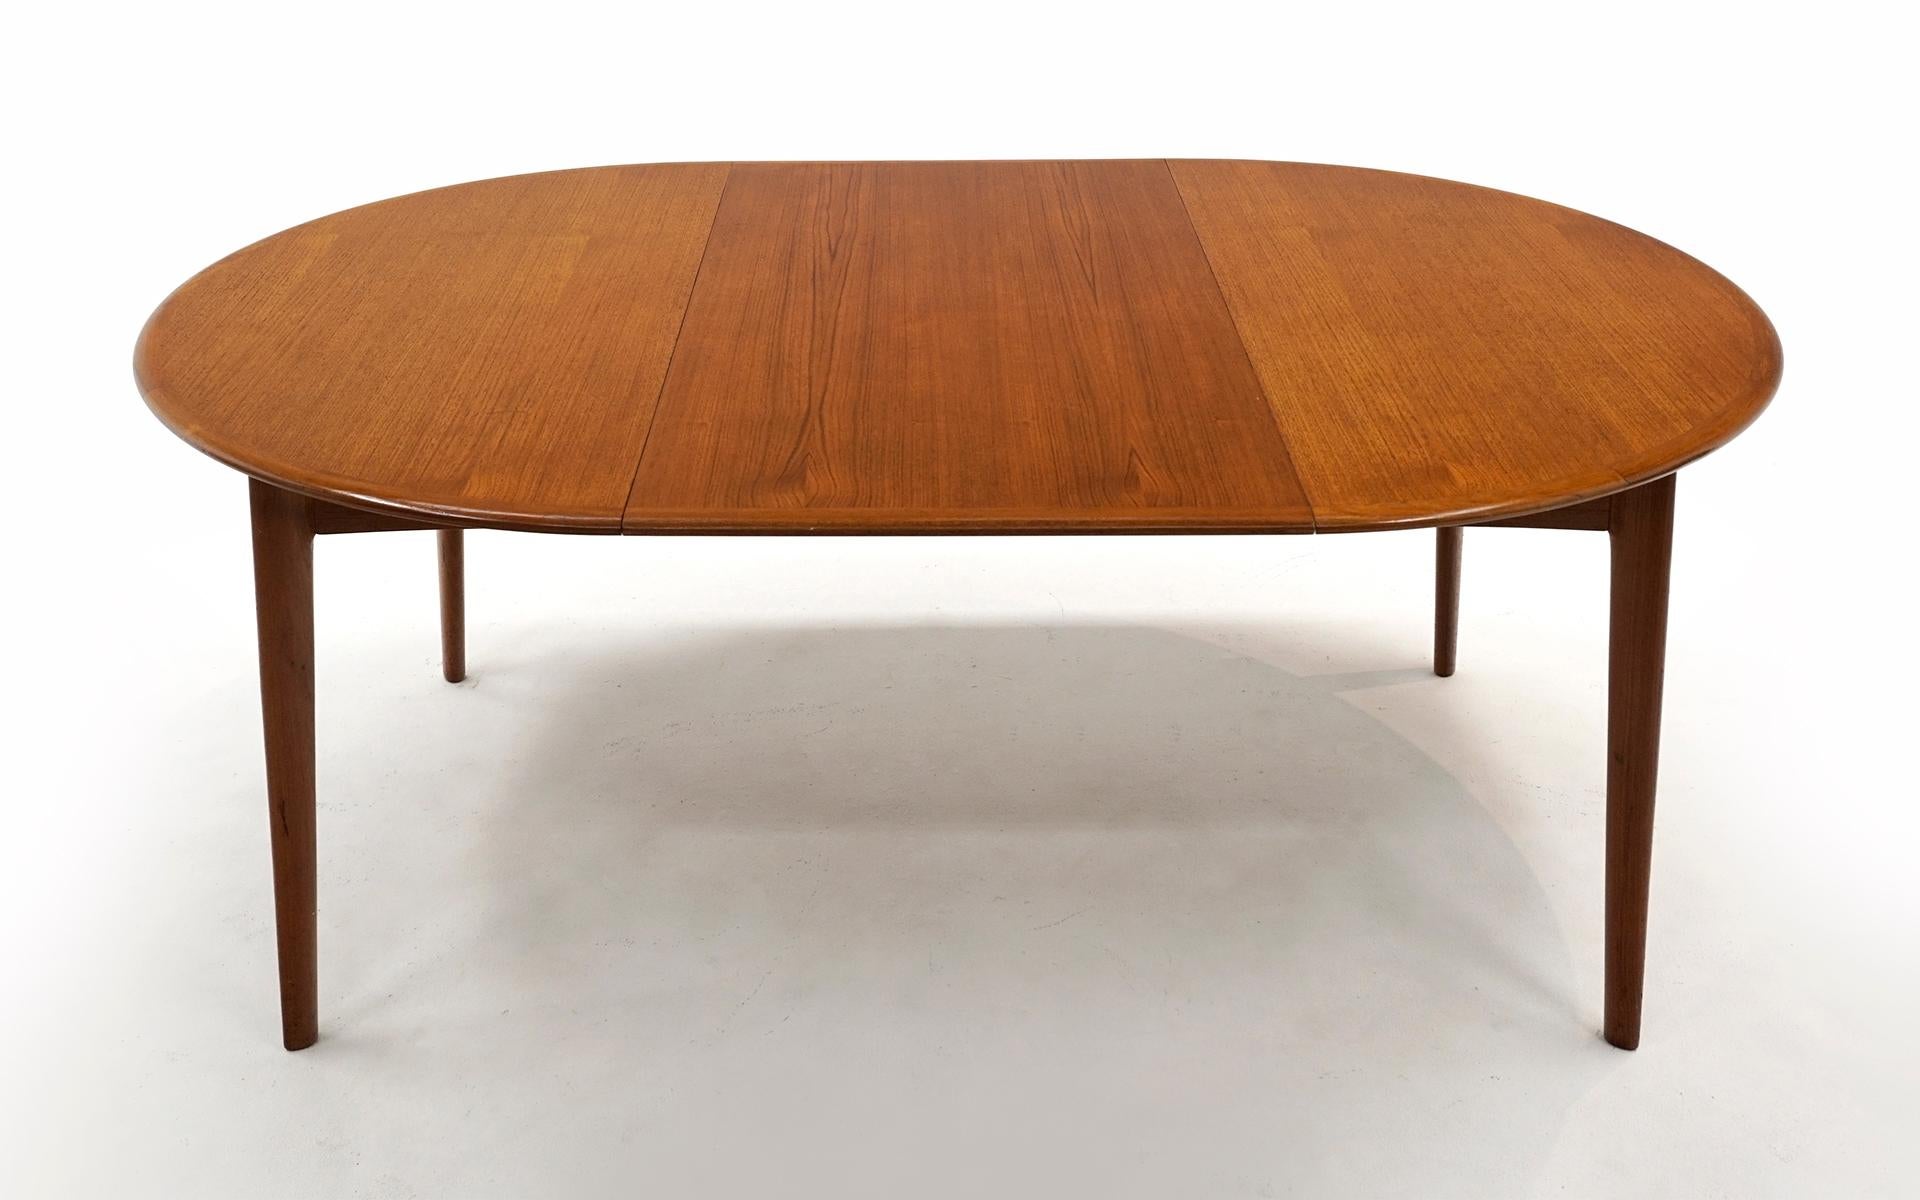 Round Expandable Danish Modern Teak Dining Table with Two Leaves, 1962, Original 1